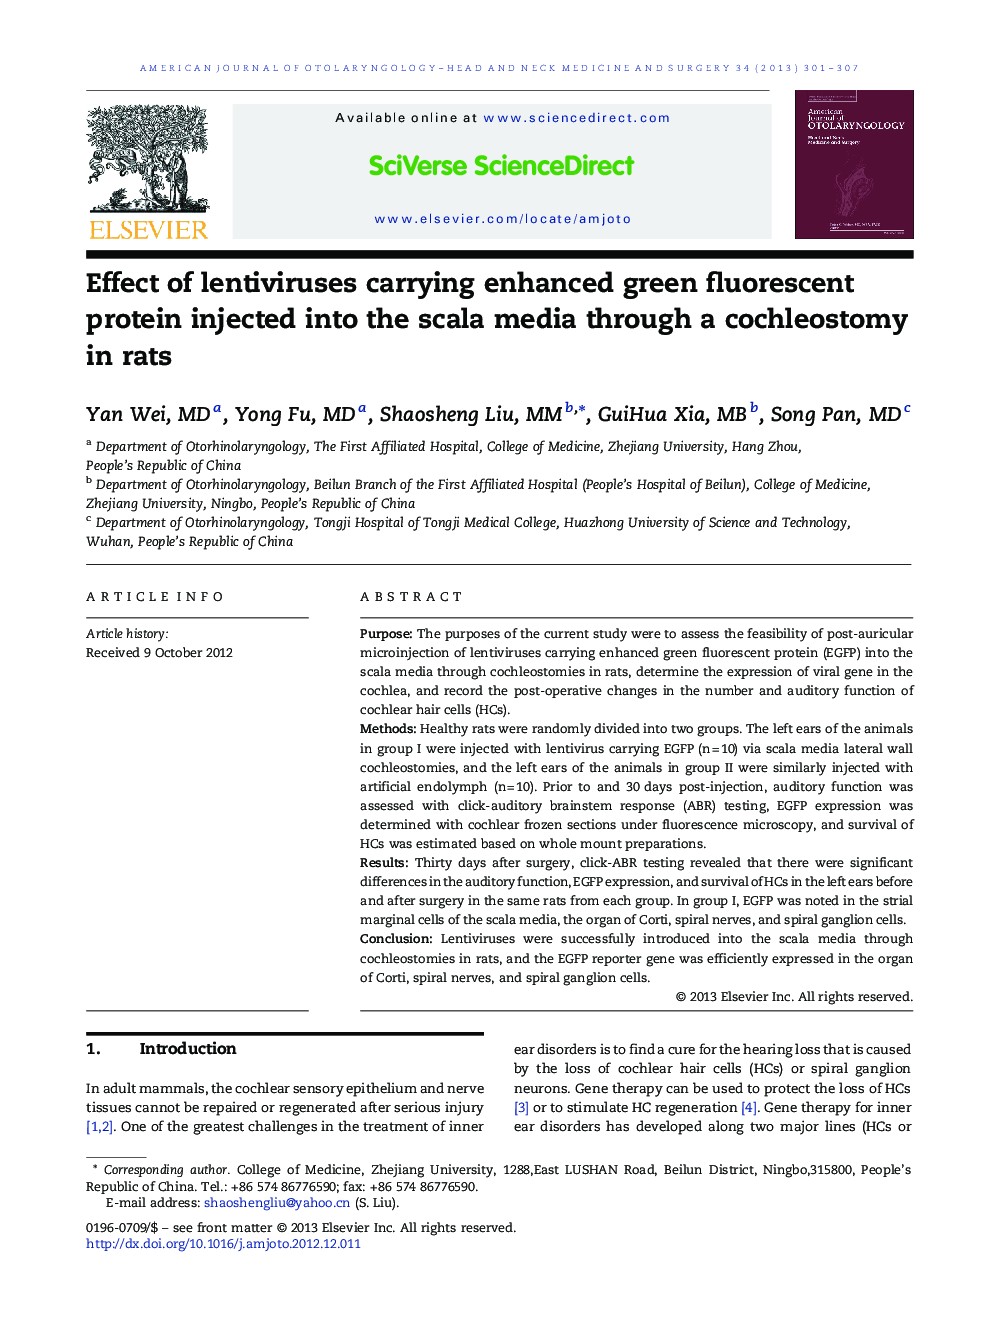 Effect of lentiviruses carrying enhanced green fluorescent protein injected into the scala media through a cochleostomy in rats